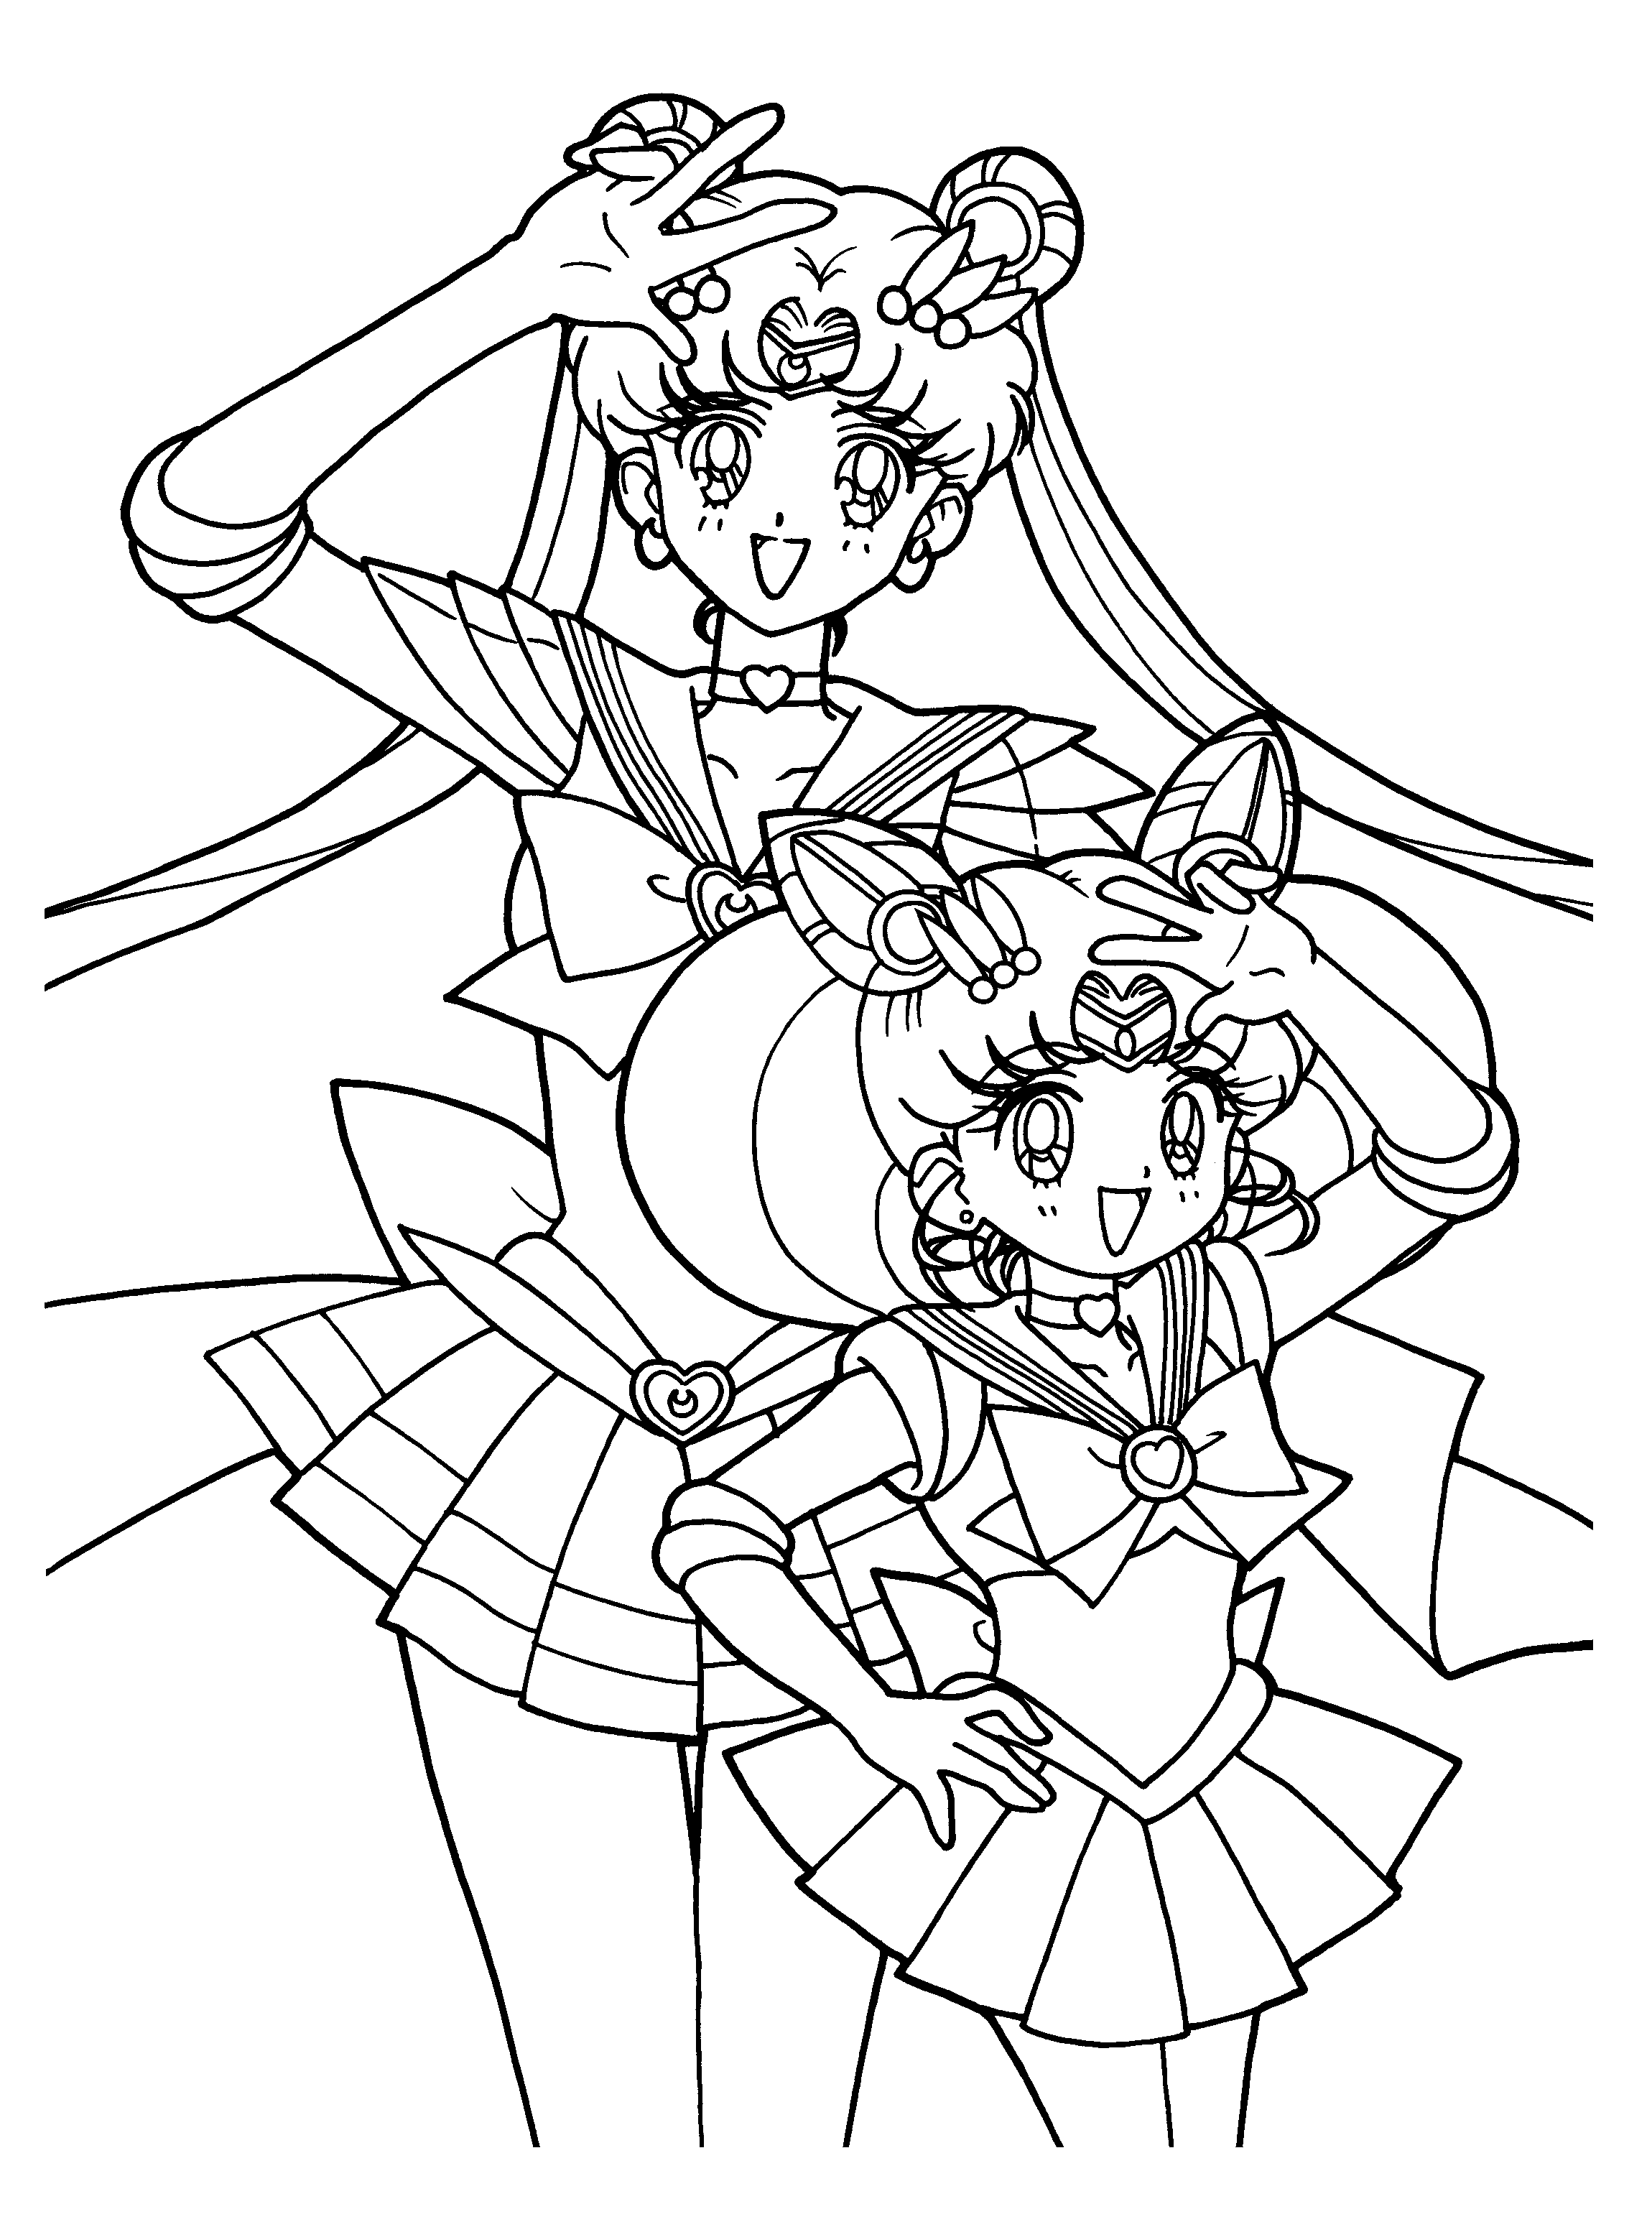 sailor moon coloring pages free printable sailor moon coloring pages for kids coloring pages sailor moon 